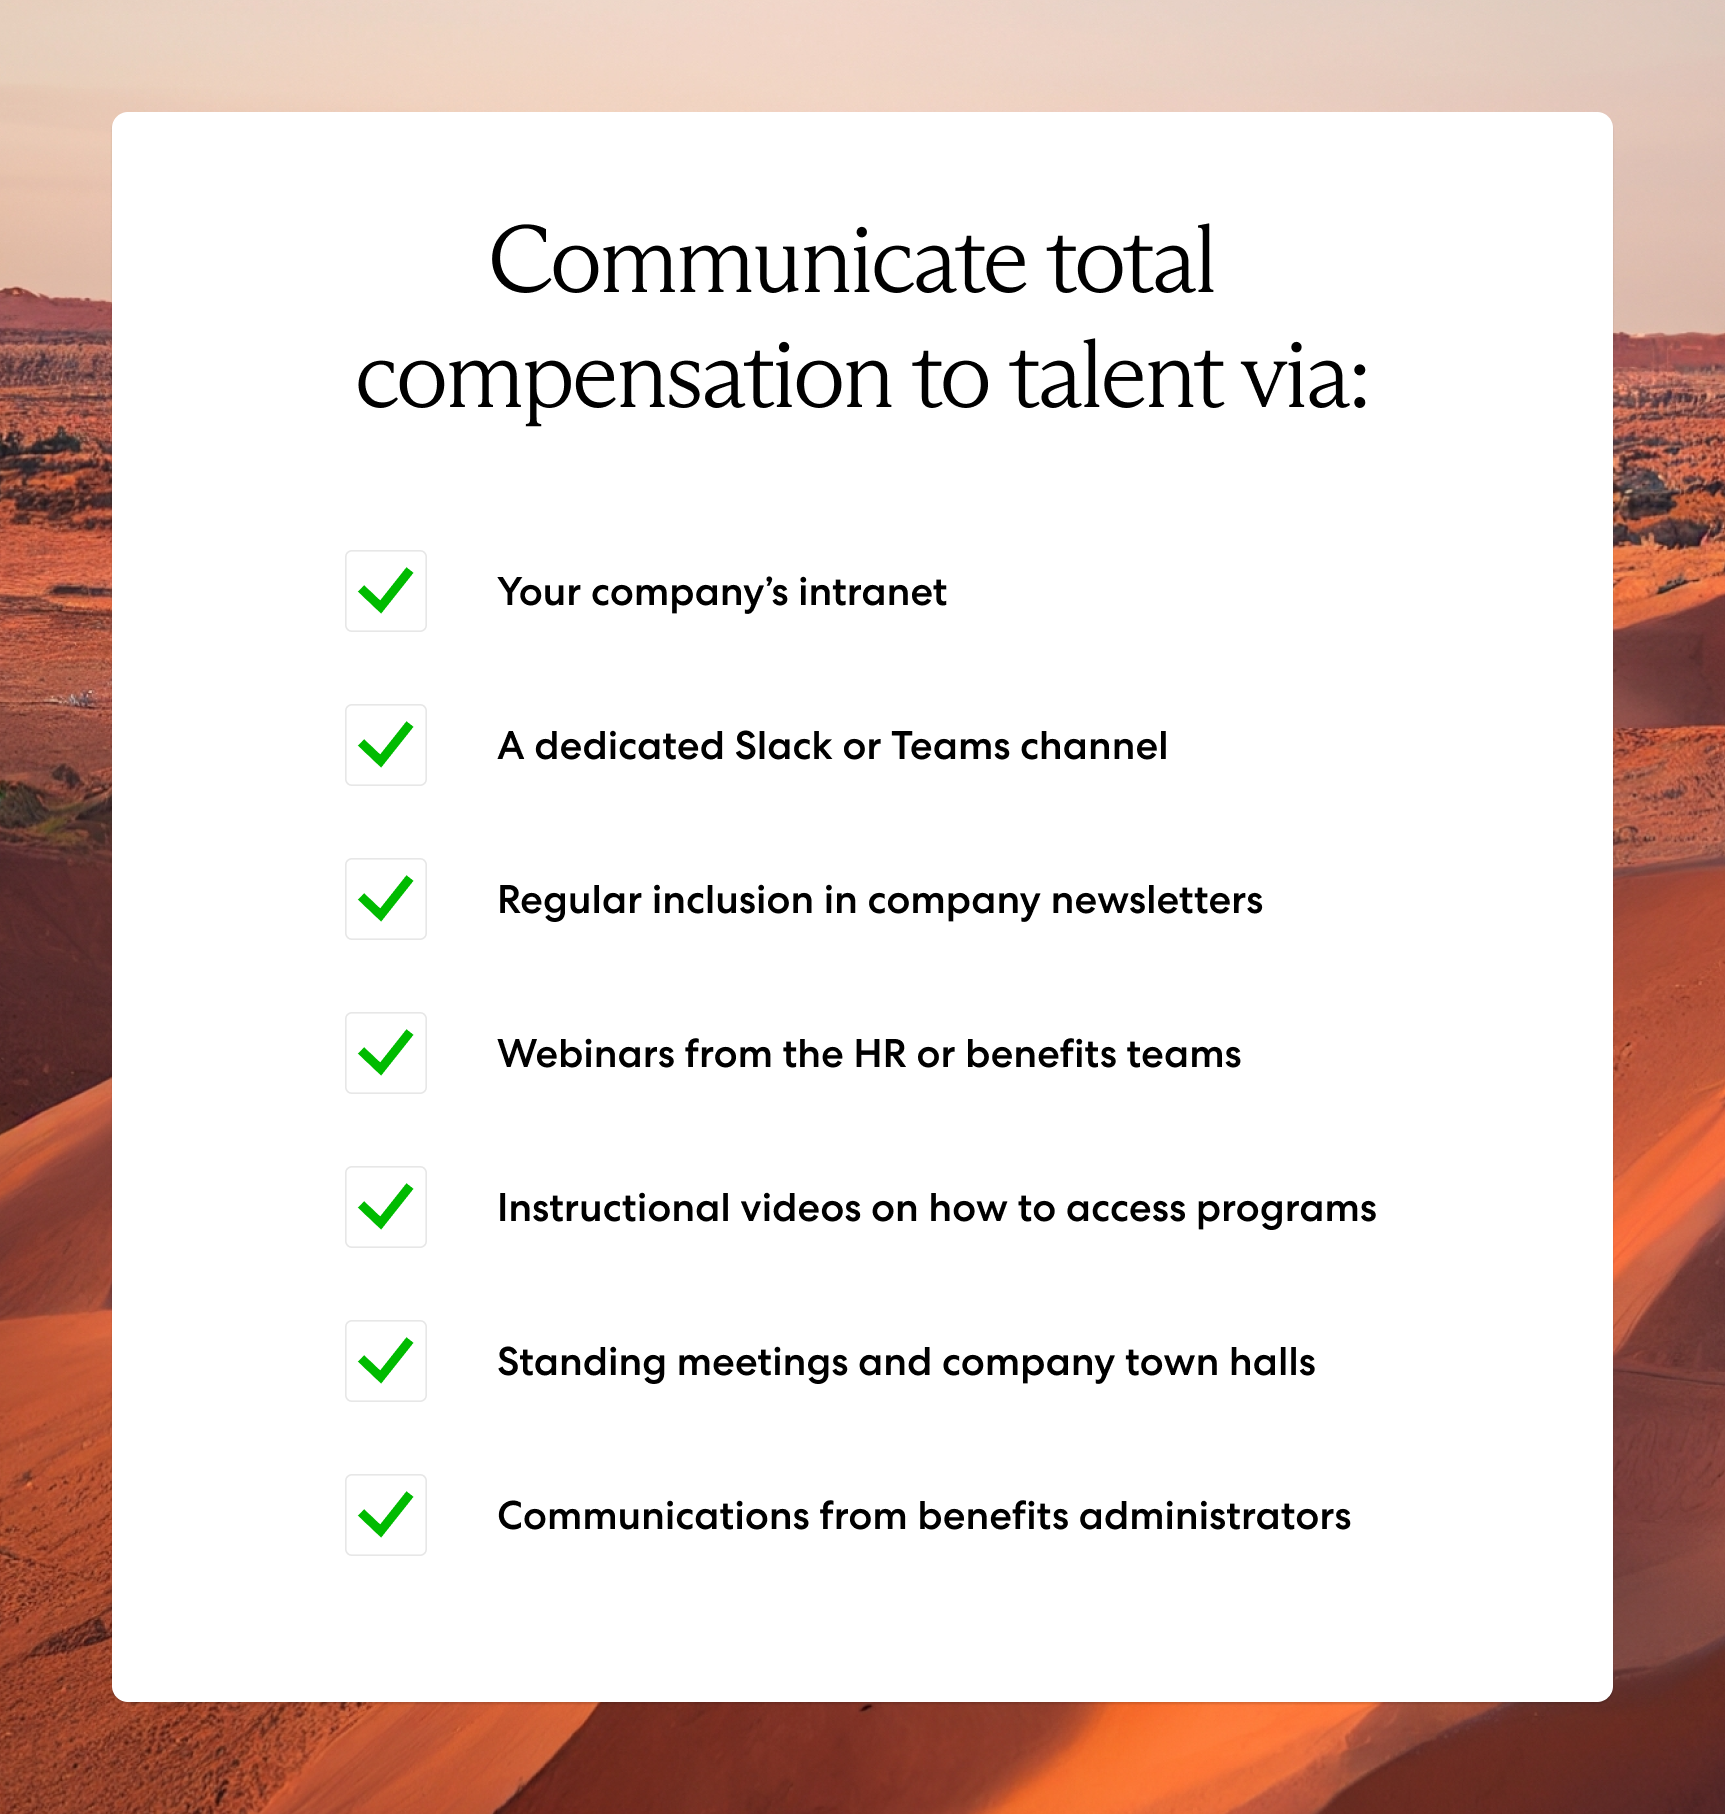 Communicate total compensation to talent